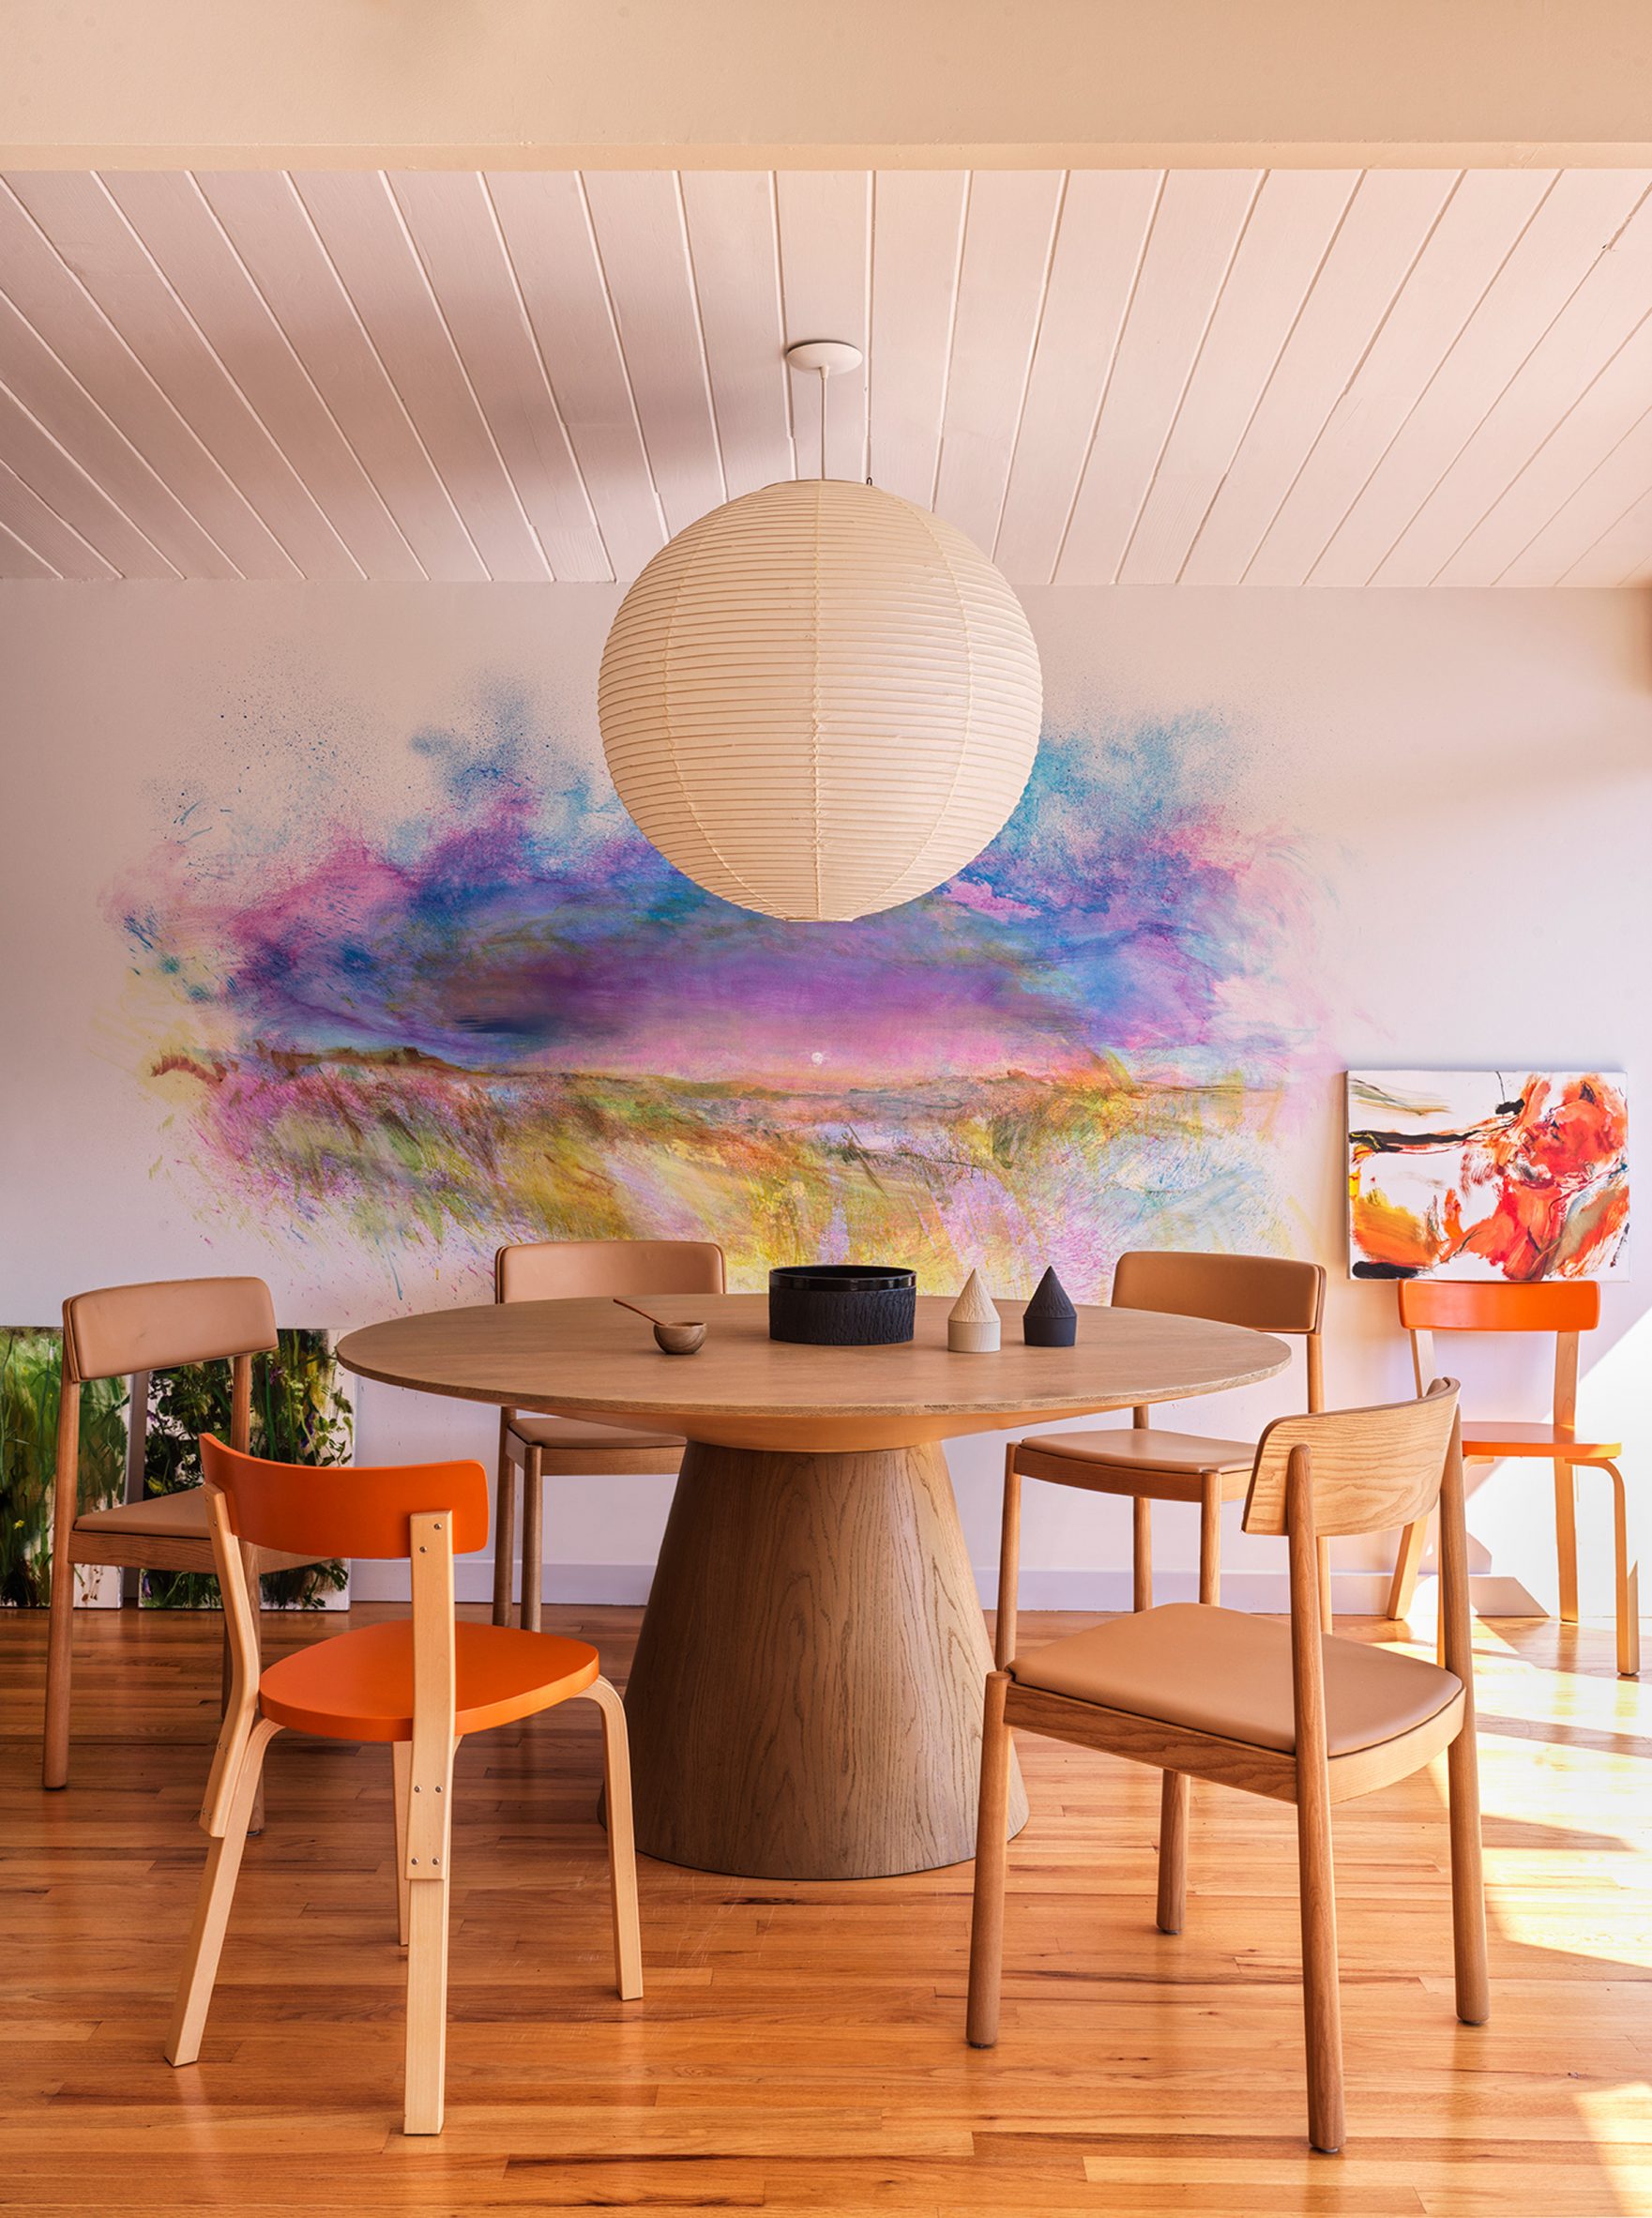 Dining table with spherical pendant lamp and colourful paintings